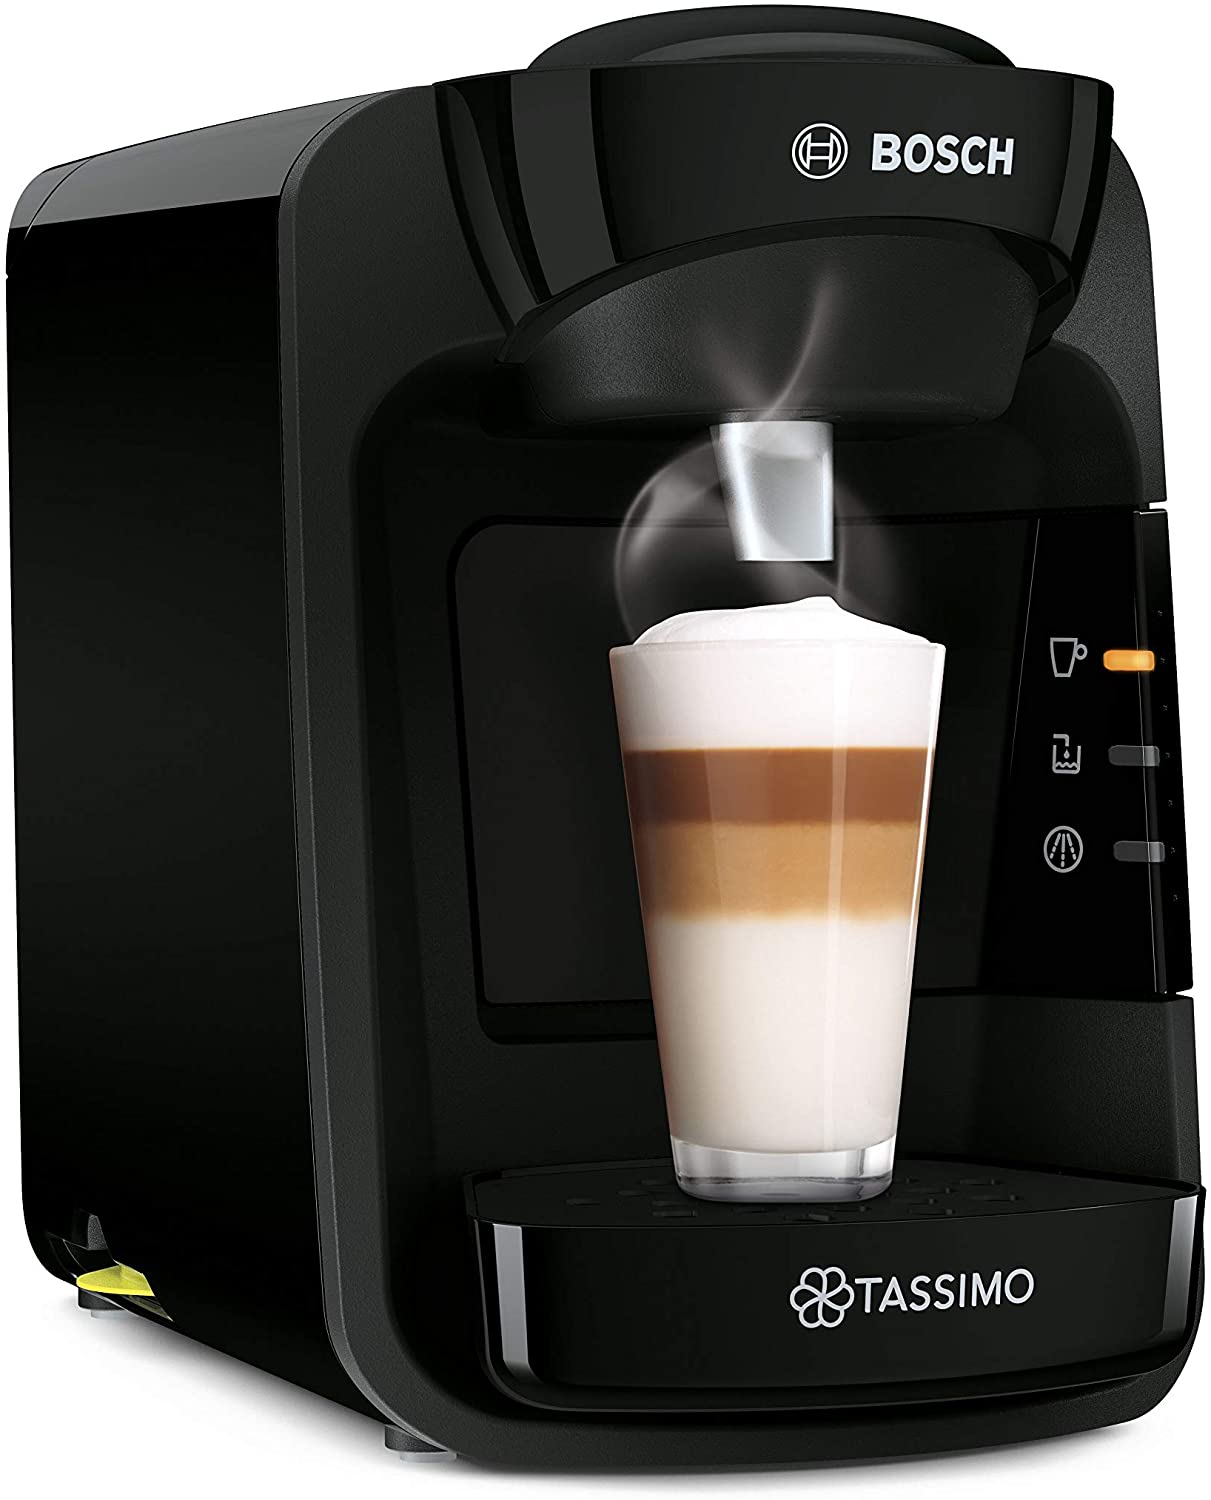 TASSIMO SUNY - How to descale your machine 